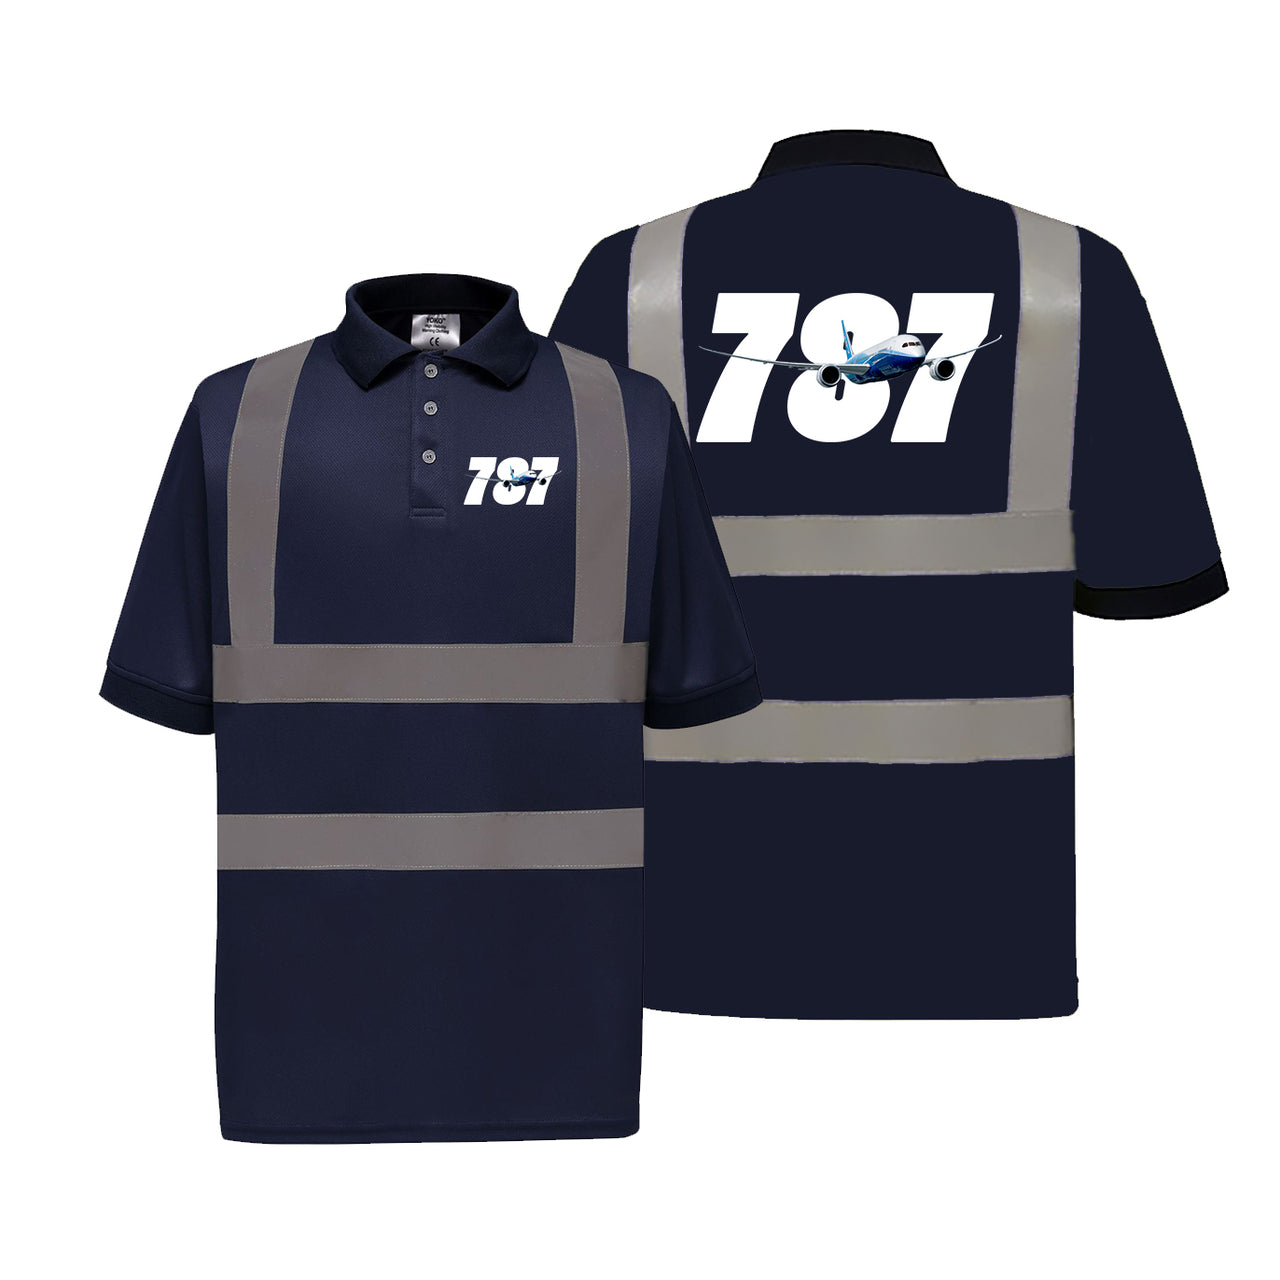 Super Boeing 787 Designed Reflective Polo T-Shirts